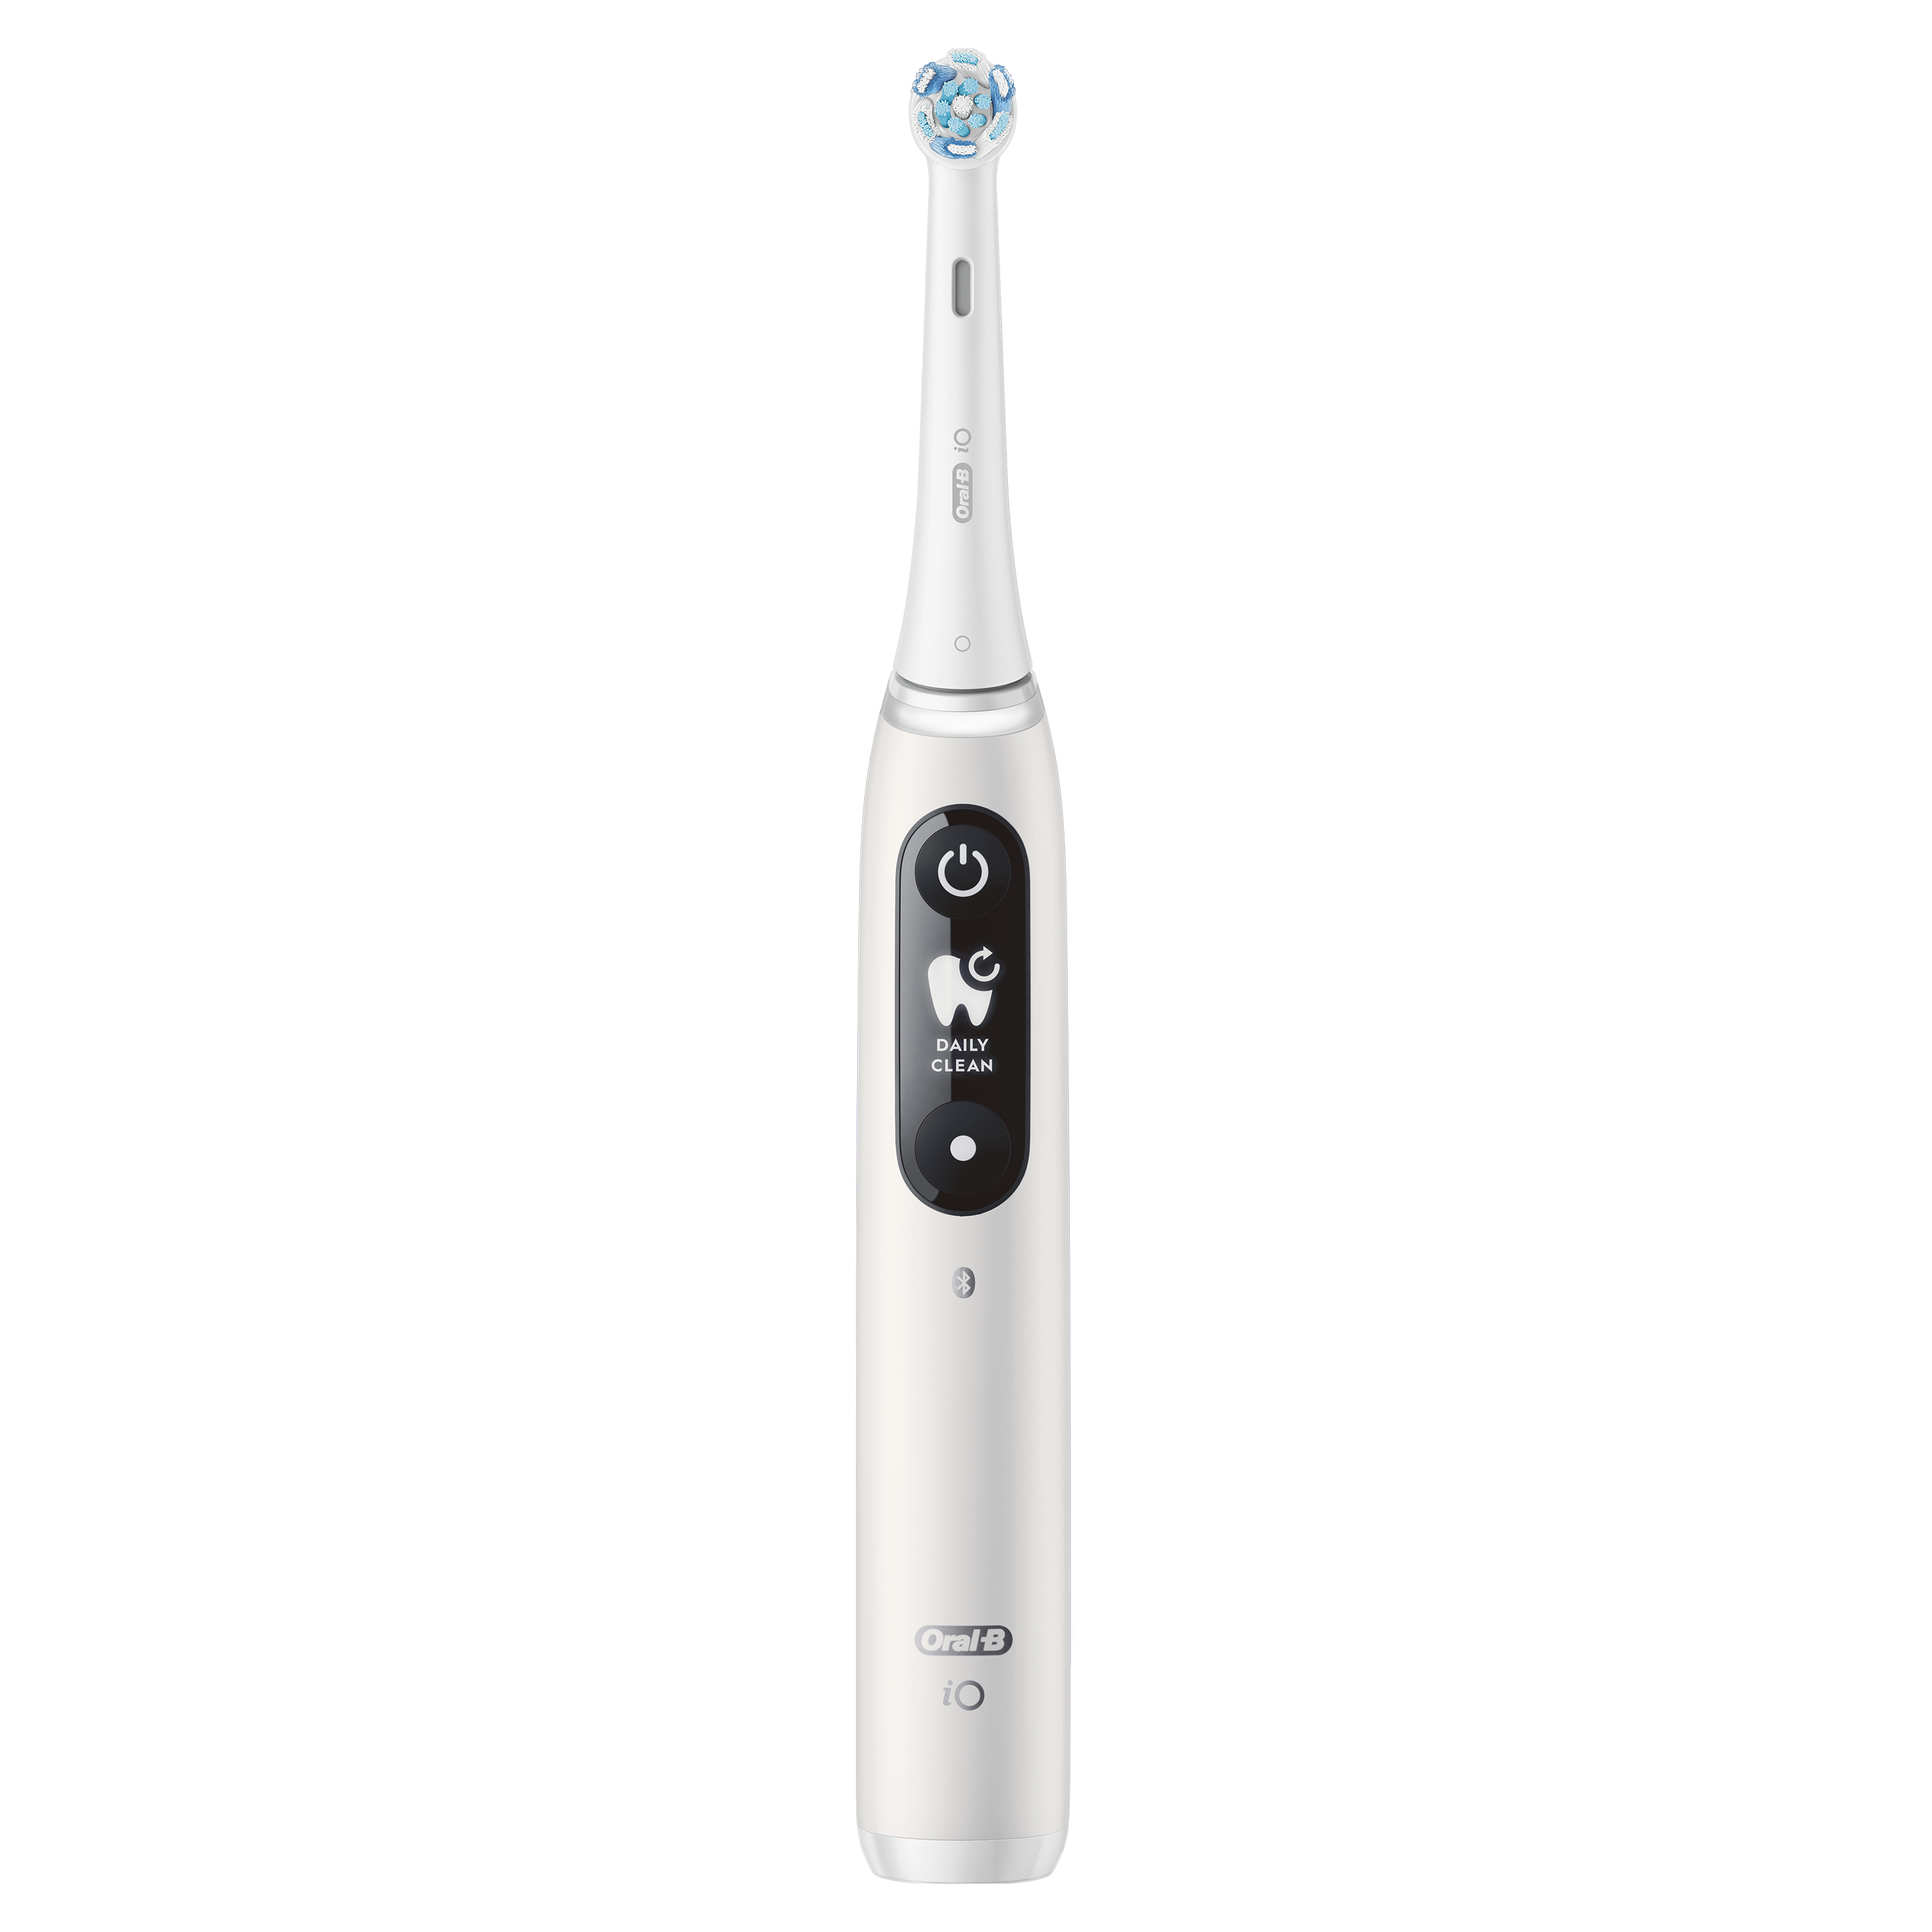 crest-oral-b-io-orthoessentials-electric-toothbrush-system